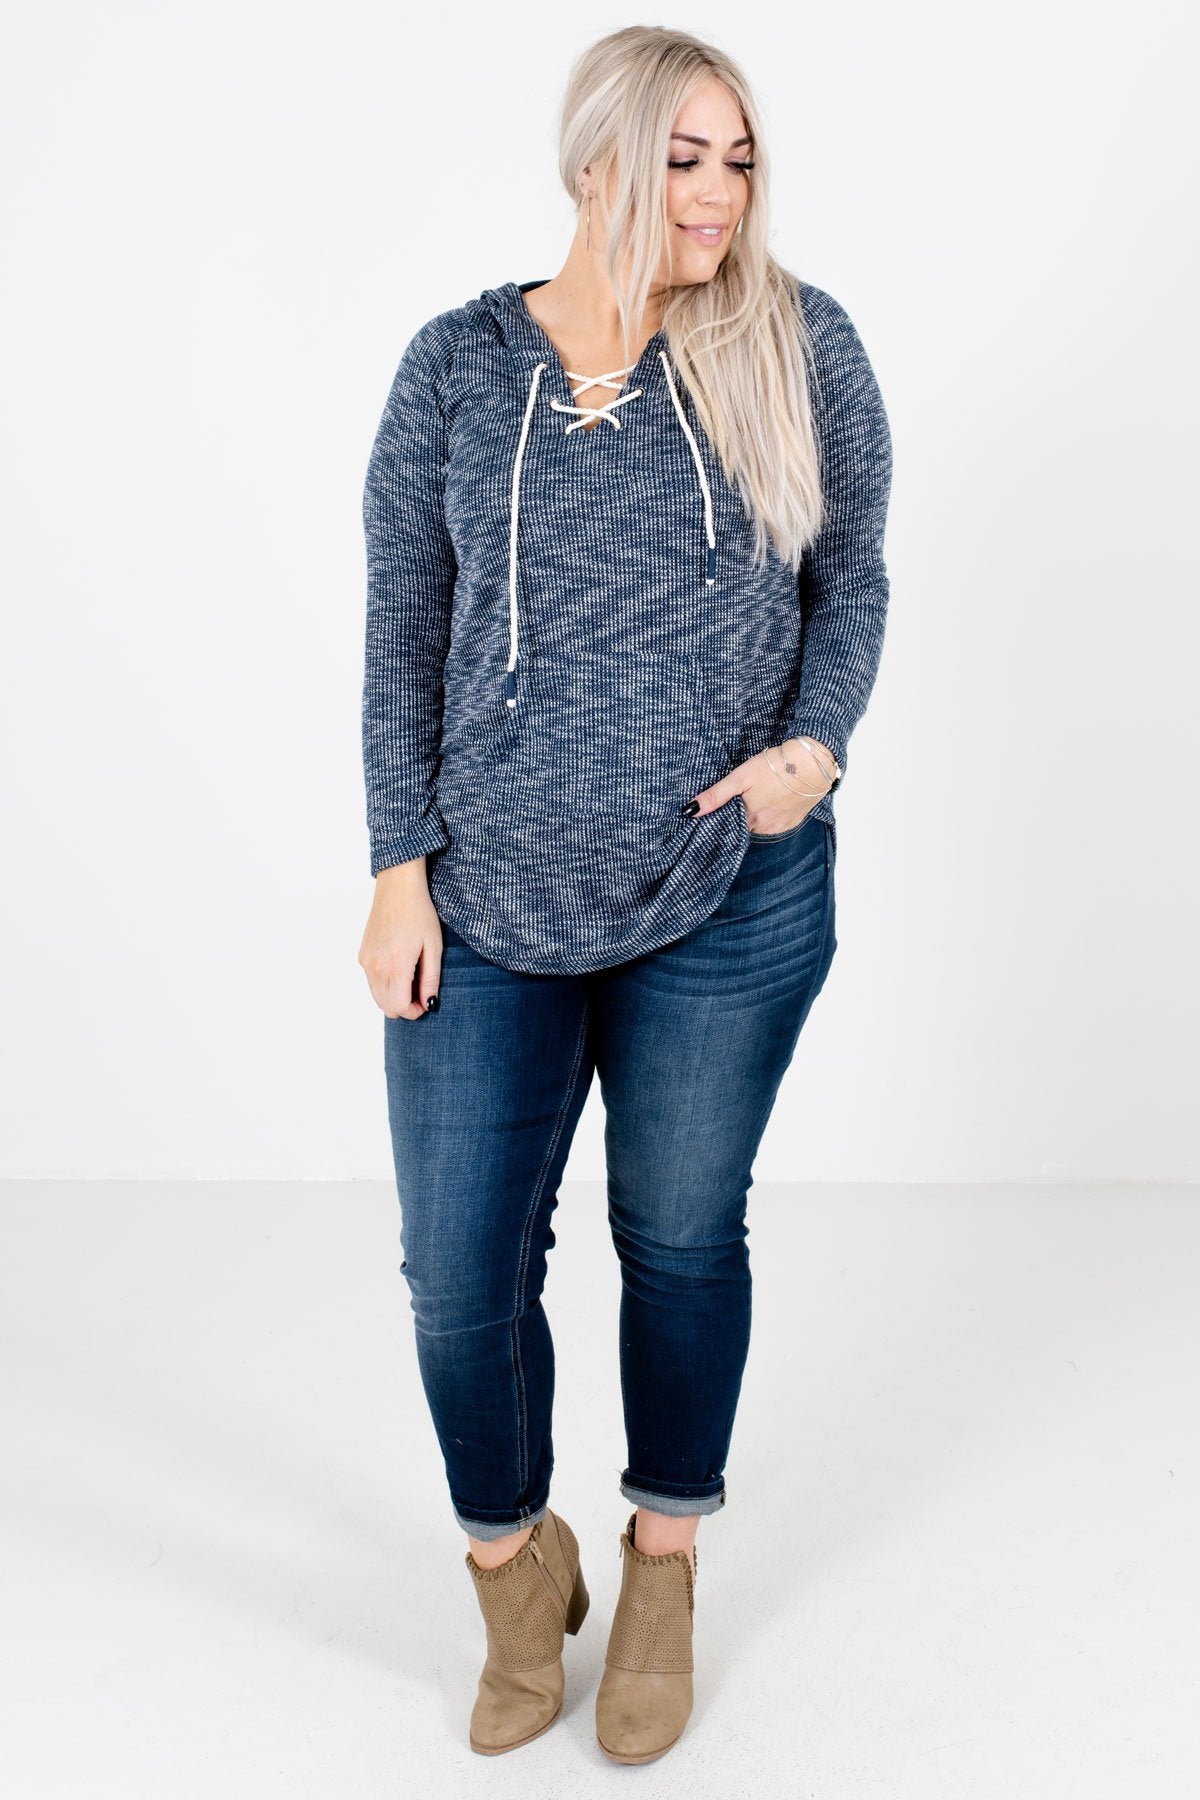 Women's Navy Blue Fall and Winter Boutique Clothing